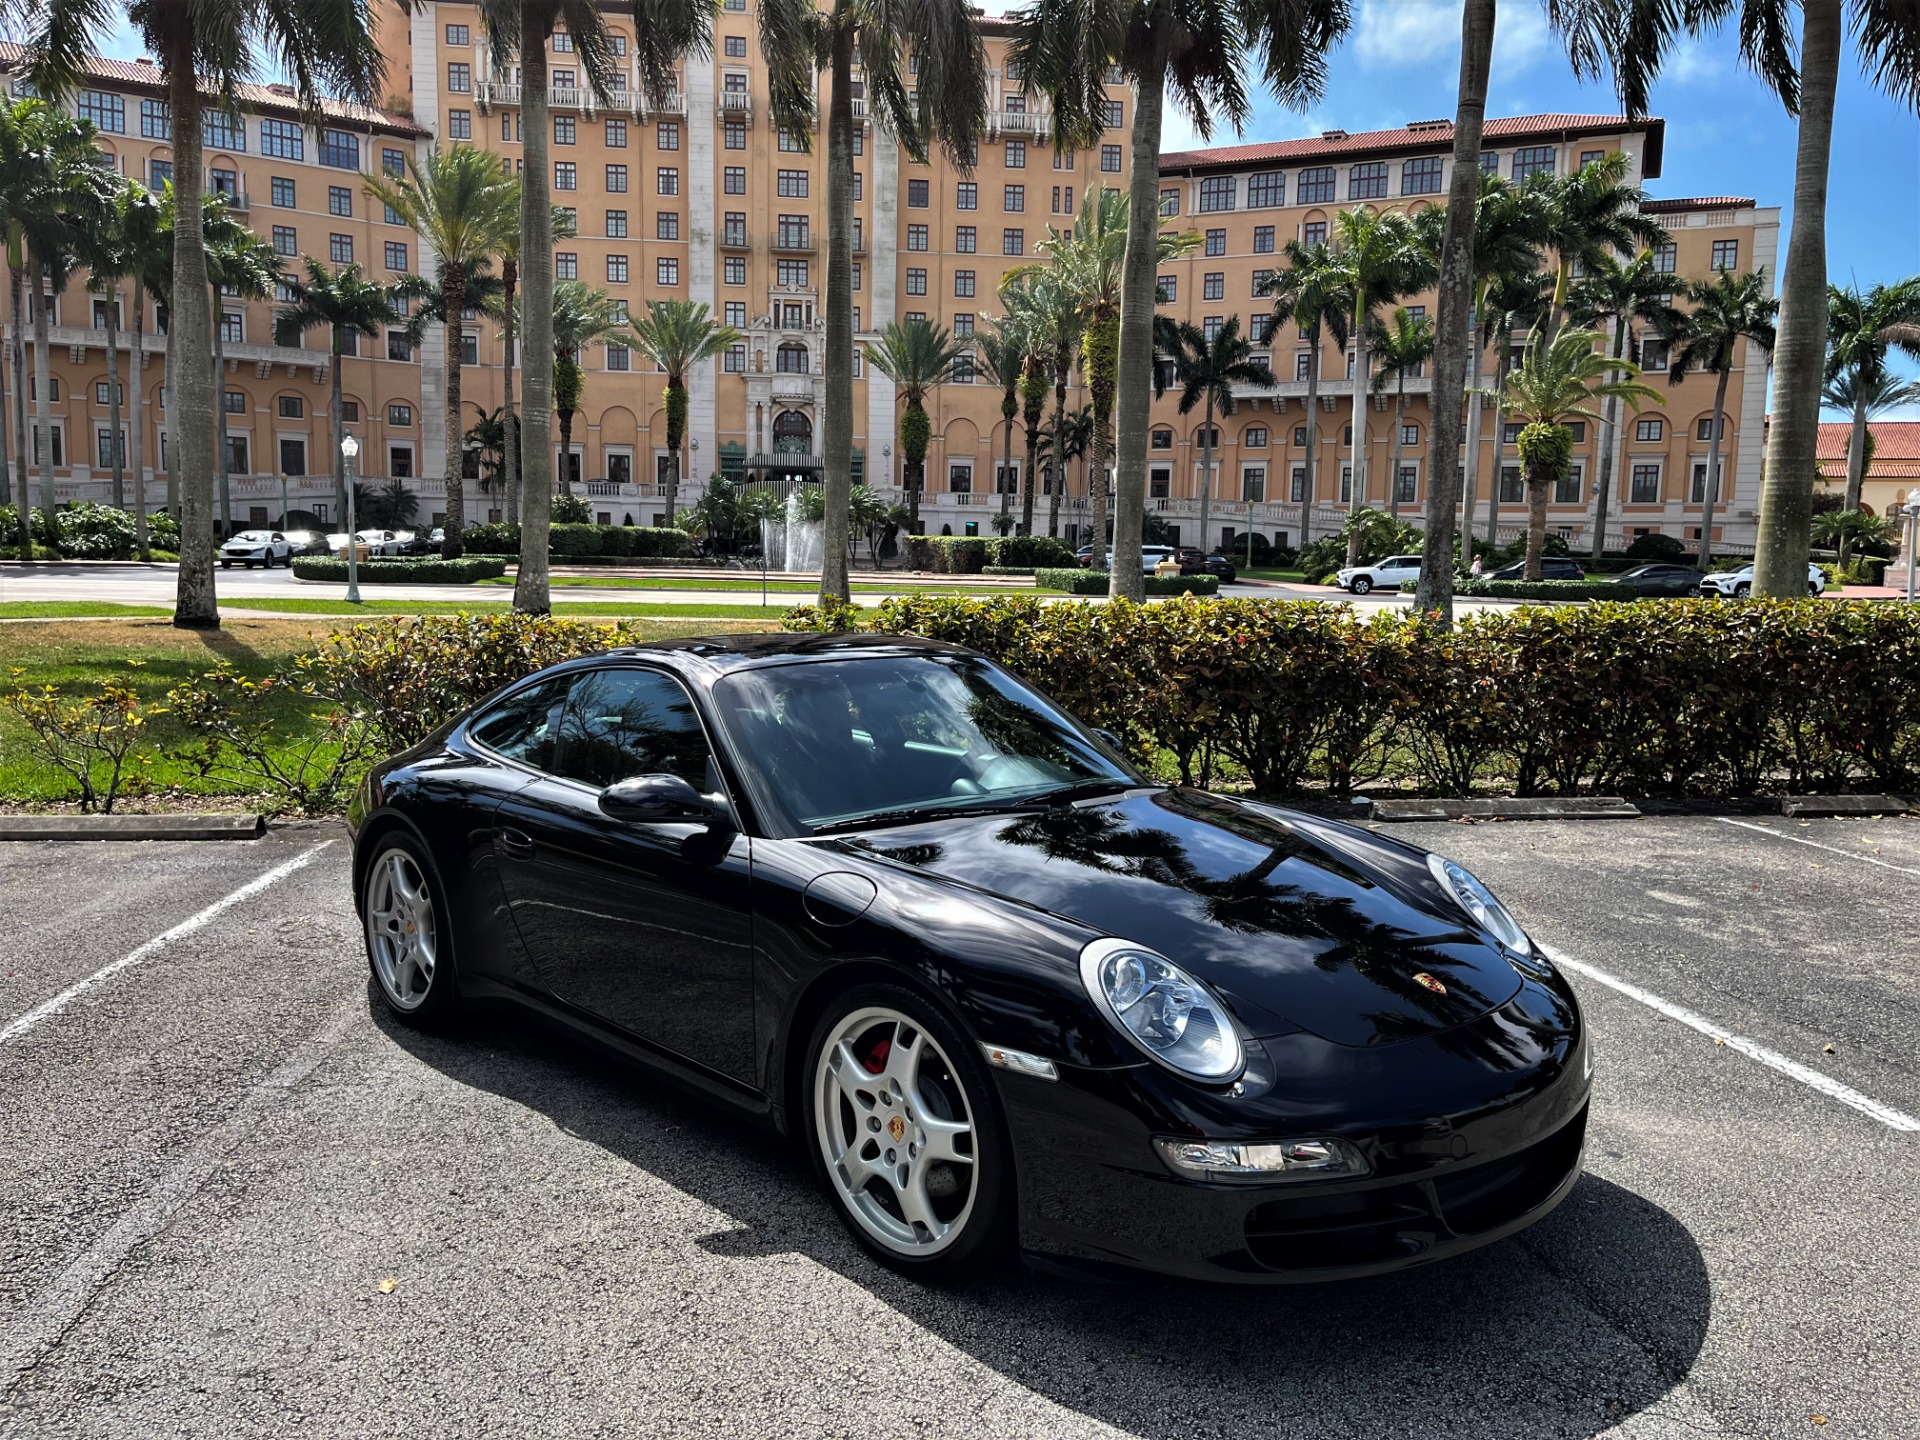 Used 2005 Porsche 911 Carrera S for sale Sold at The Gables Sports Cars in Miami FL 33146 2